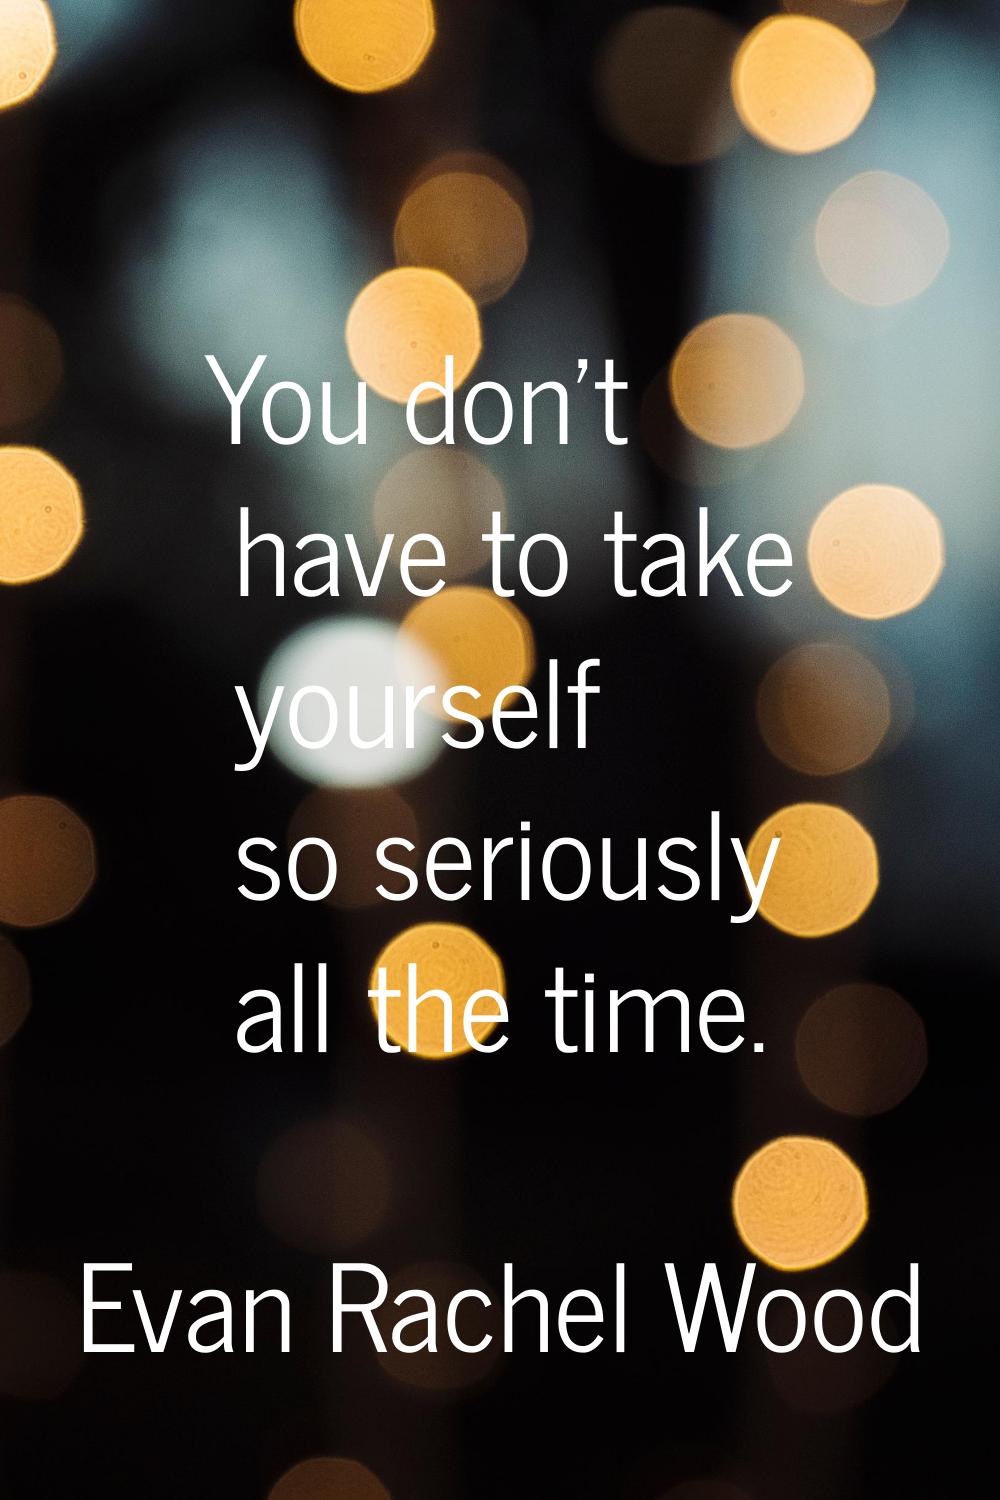 You don't have to take yourself so seriously all the time.